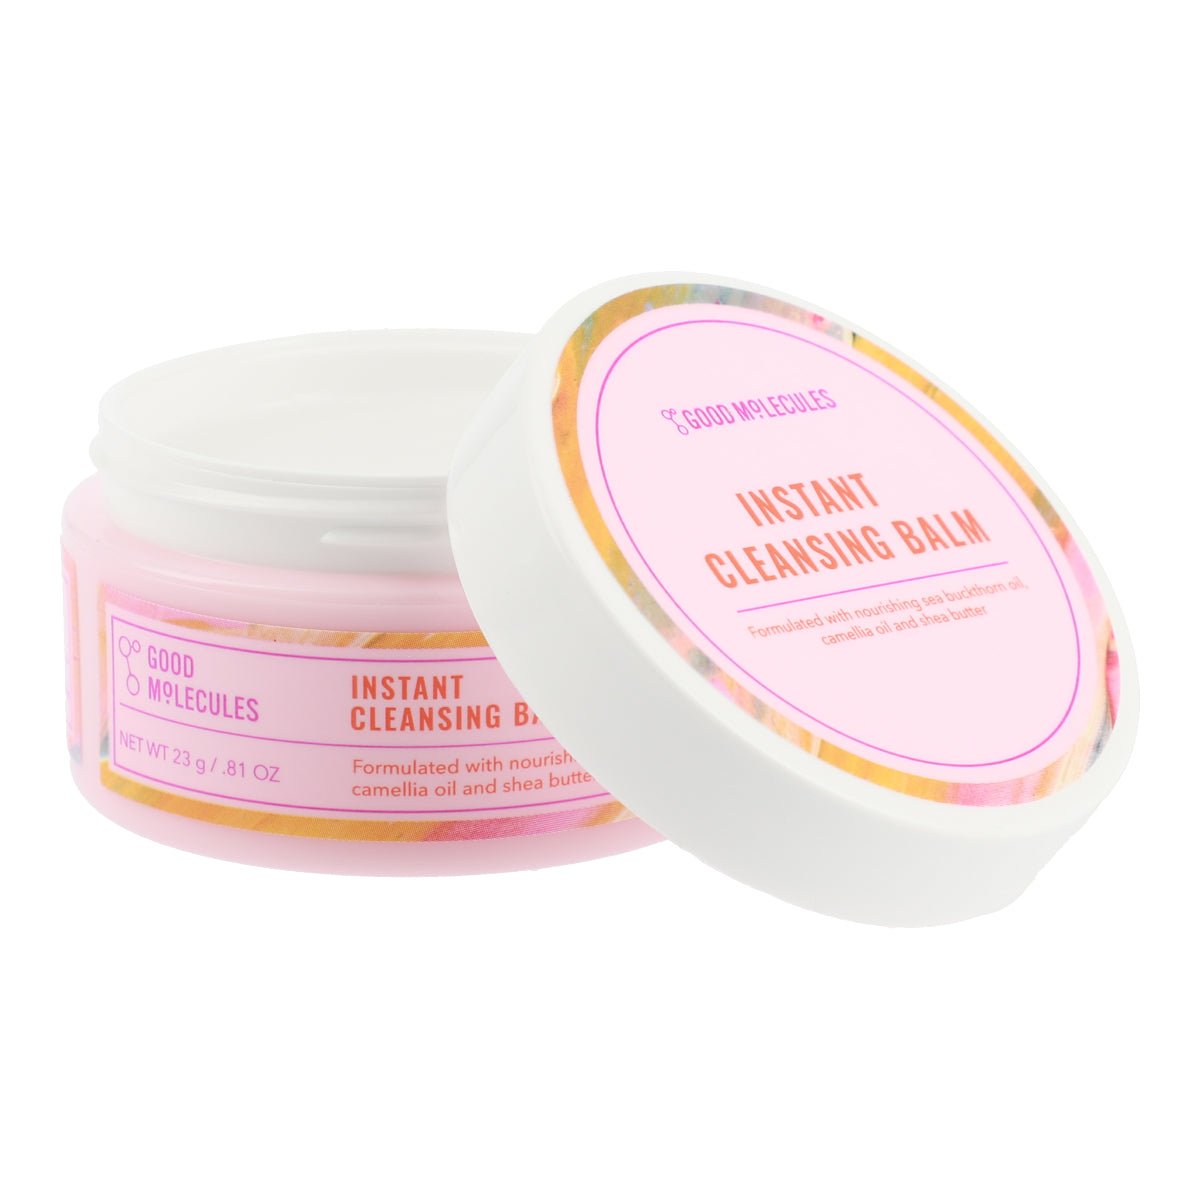 Instant Cleansing Balm - Travel Size 23g